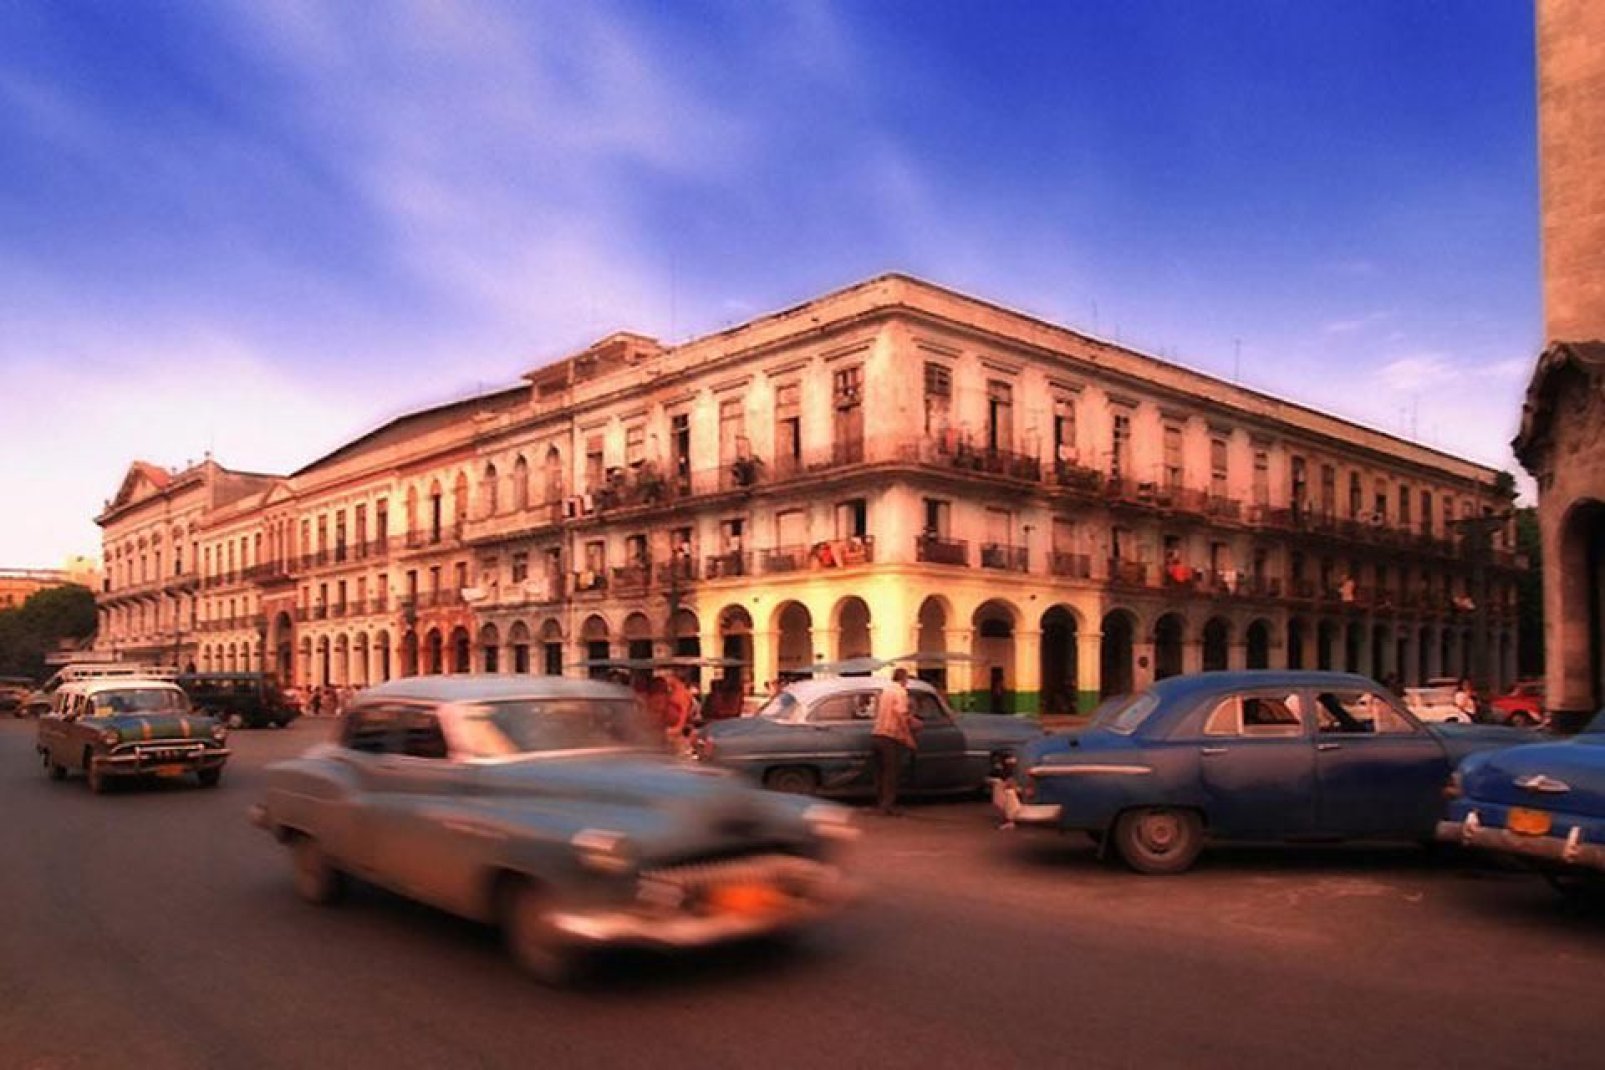 Colonial buildings and ancient cars line the streets of Havana